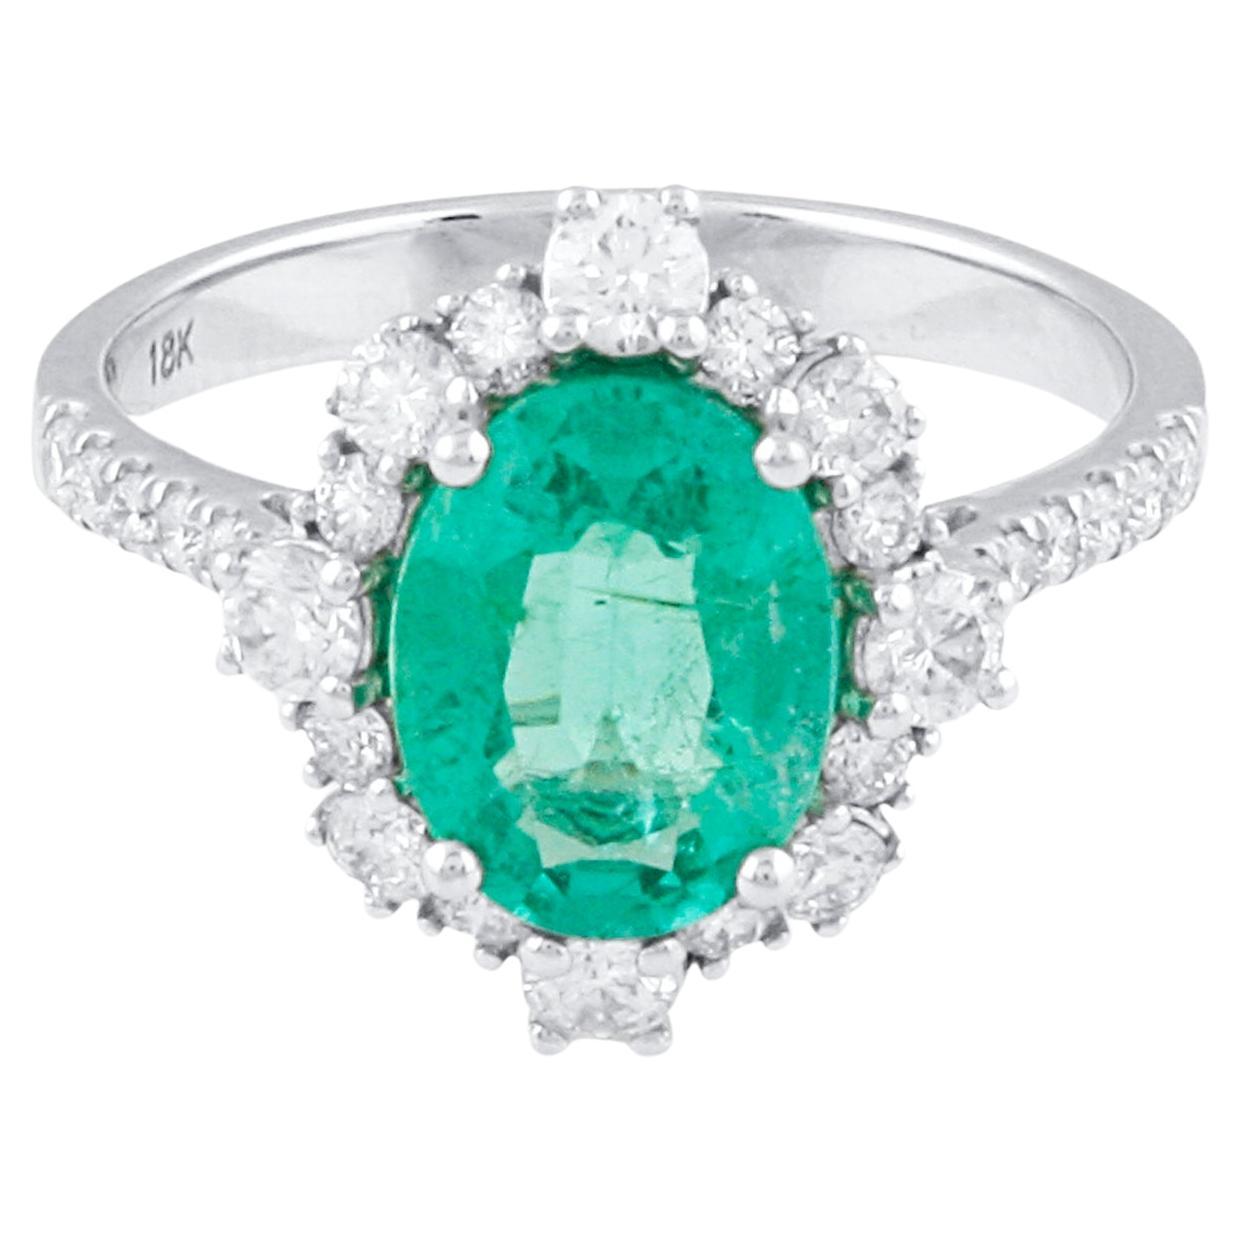 Emerald Oval and Diamond Ring in 18K White Gold